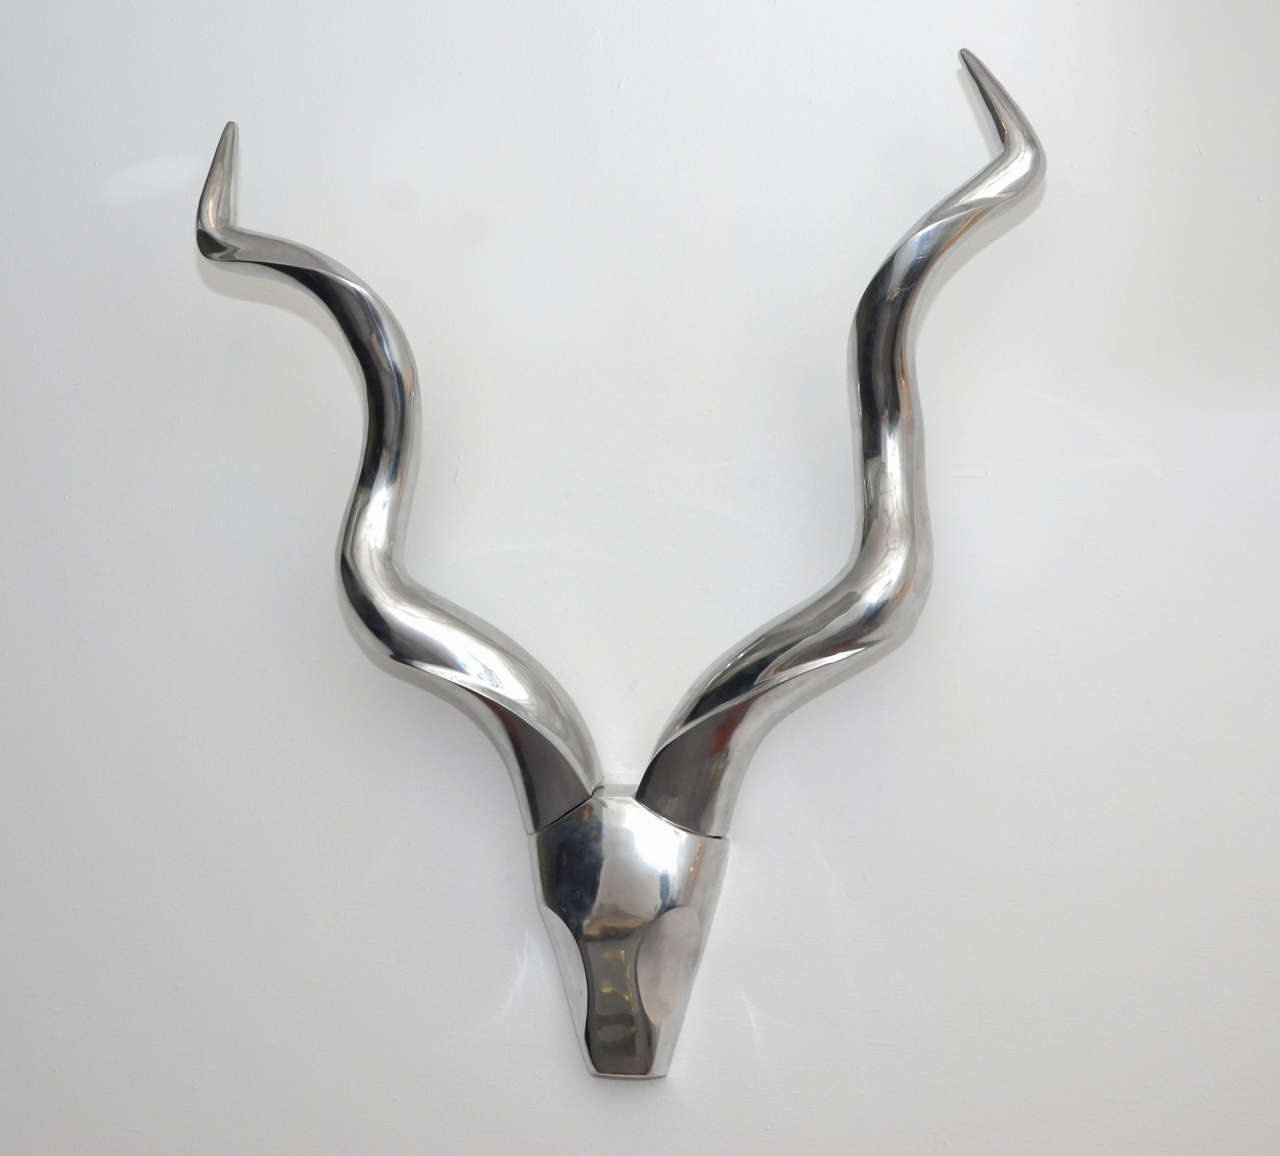 Large 1970s sculpture by Pierre David (not signed); represents a stylized animal skull with horns in brushed aluminum.